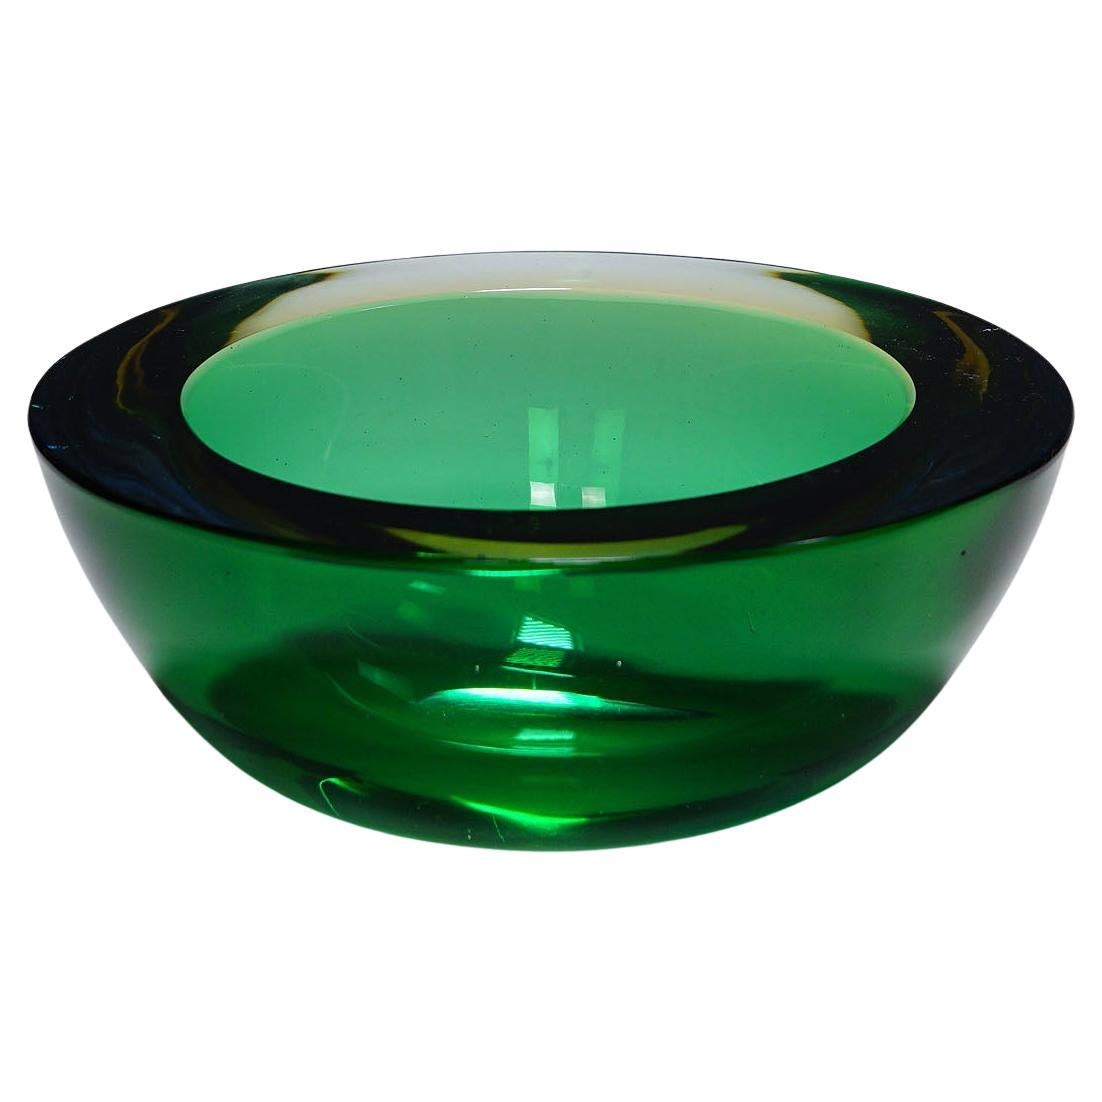 Archimede Seguso Geode Bowl in Green and Yellow, Murano Italy ca. 1960s For Sale